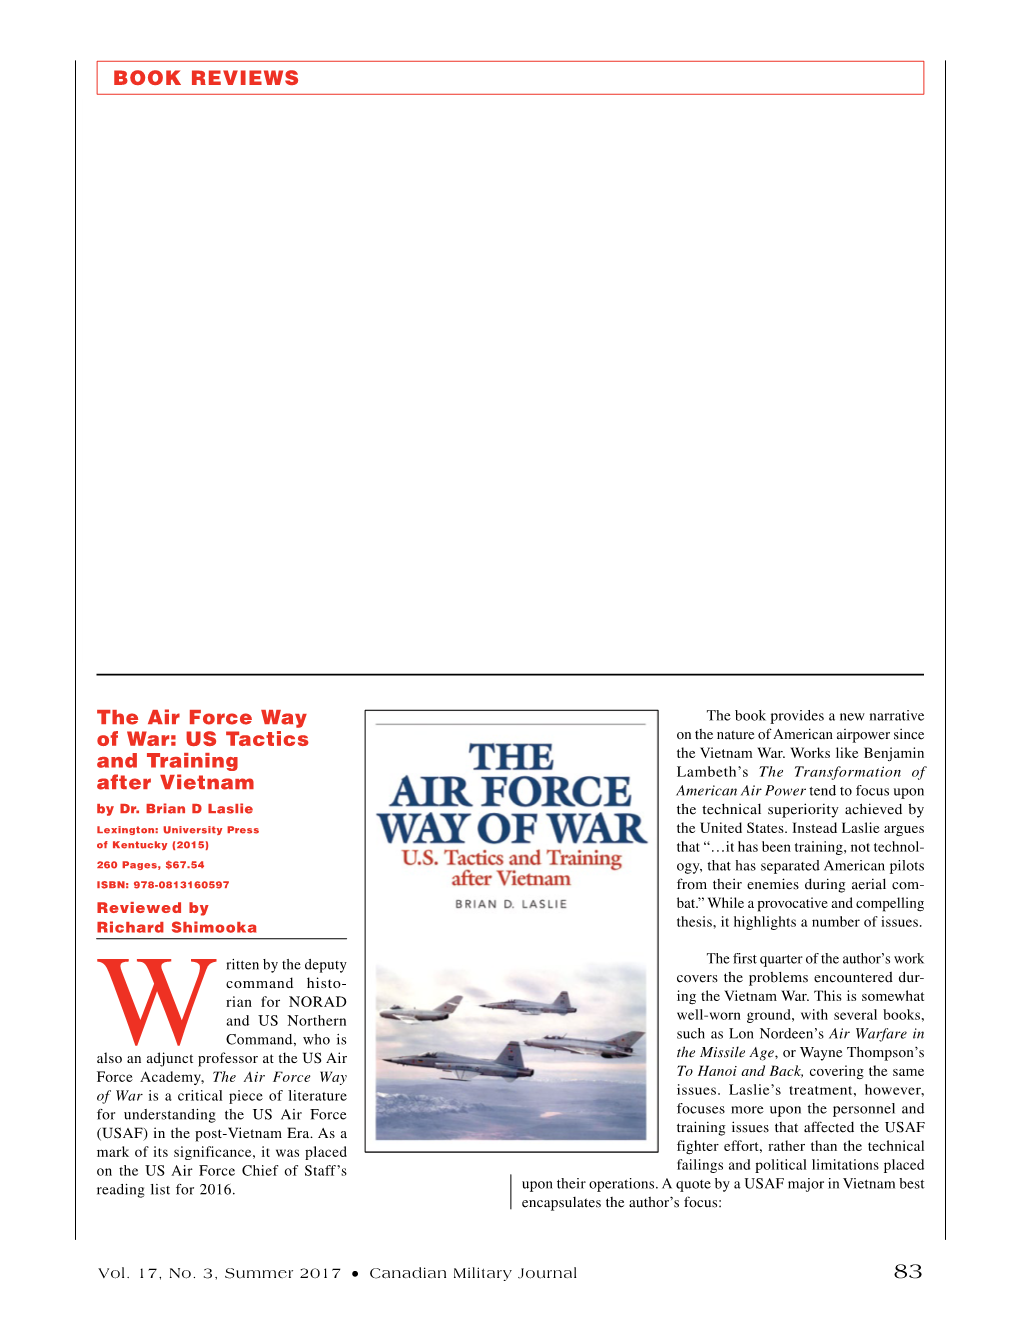 BOOK REVIEWS the Air Force Way of War: US Tactics and Training After